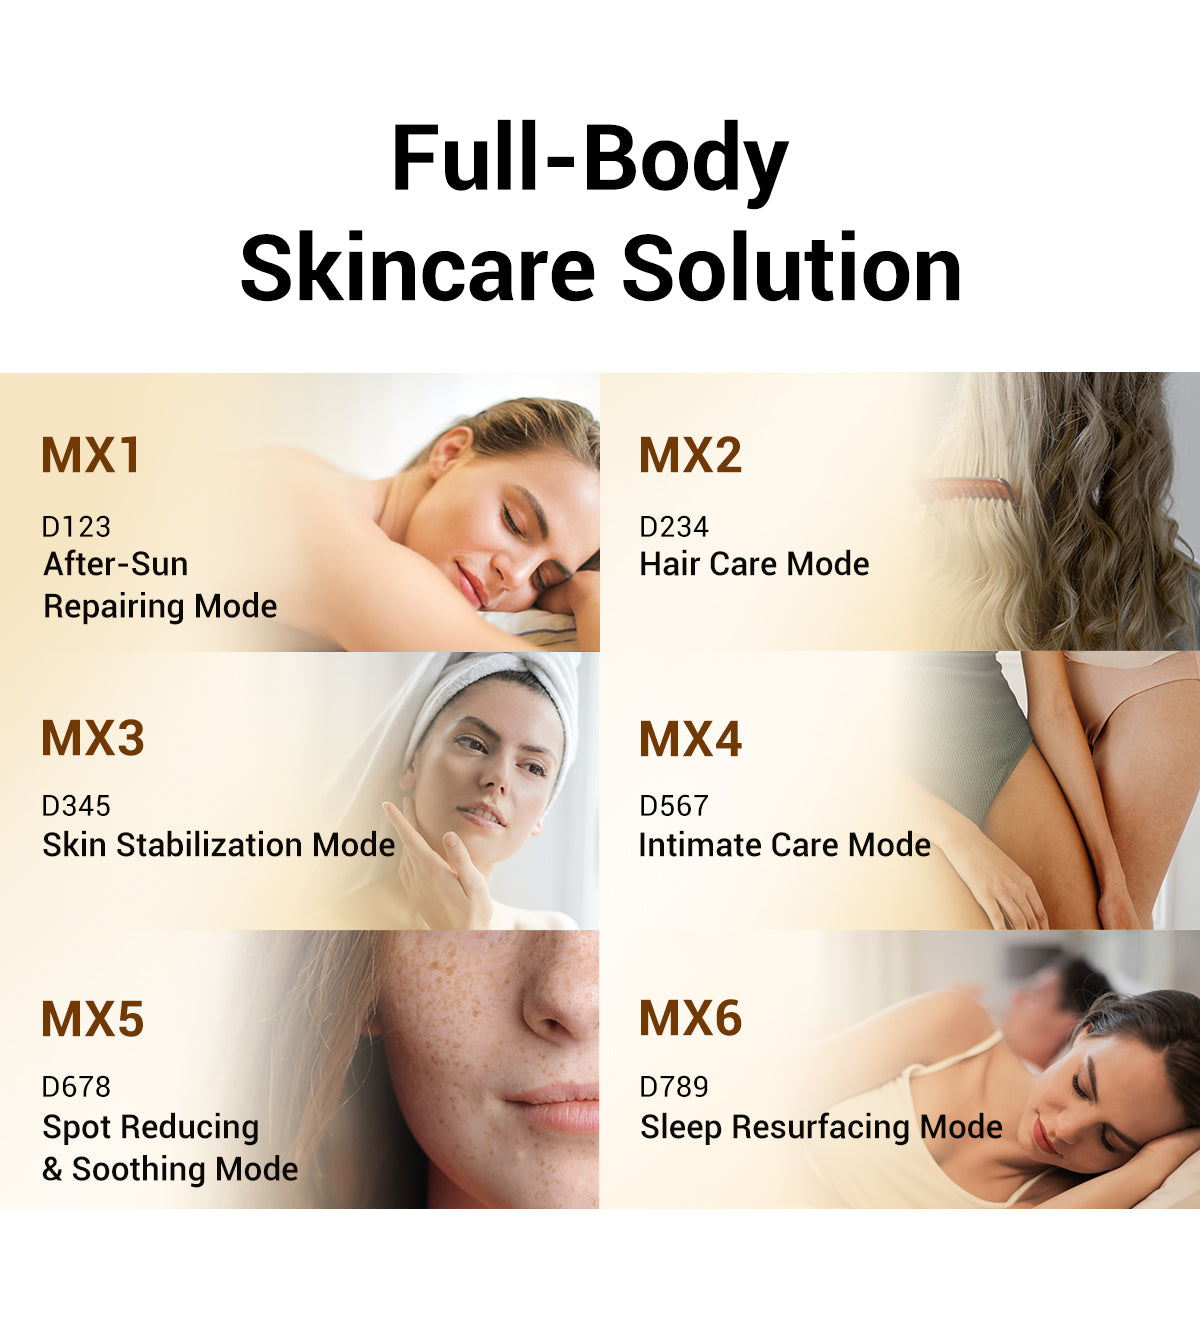 Full-Body Skincare LED Light Modes featuring After-Sun Repairing, Hair Care, Skin Stabilization, Intimate Care, Spot Reduction, and Sleep Resurfacing for targeted skincare treatments.